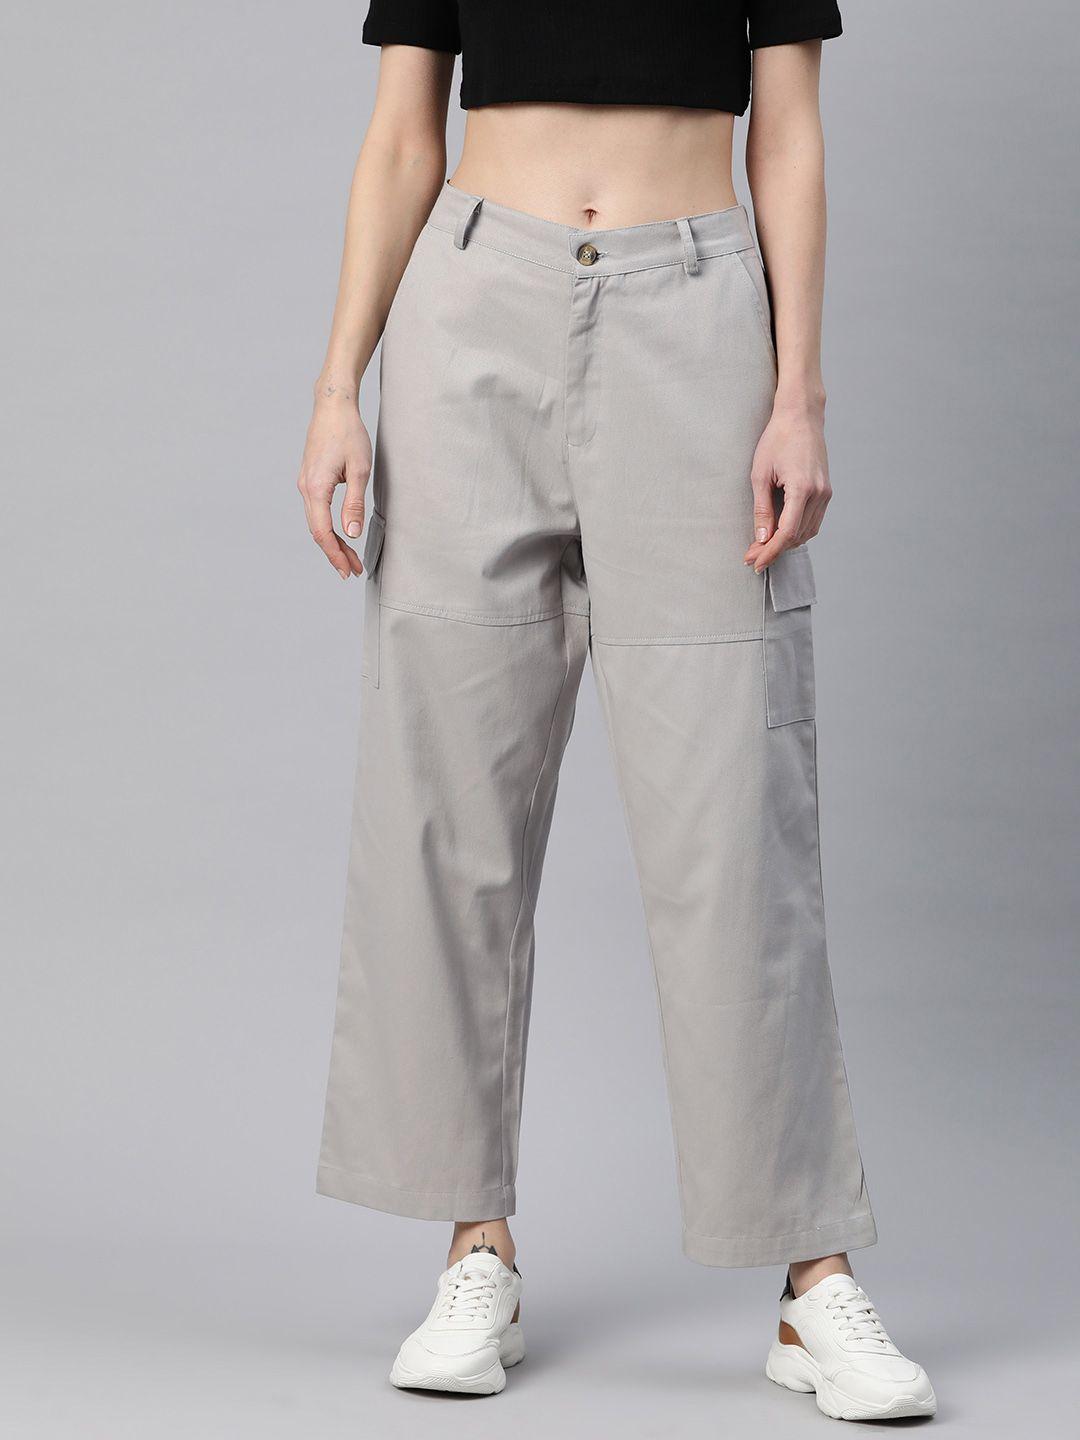 popnetic flat-front high-rise pure cotton cargos